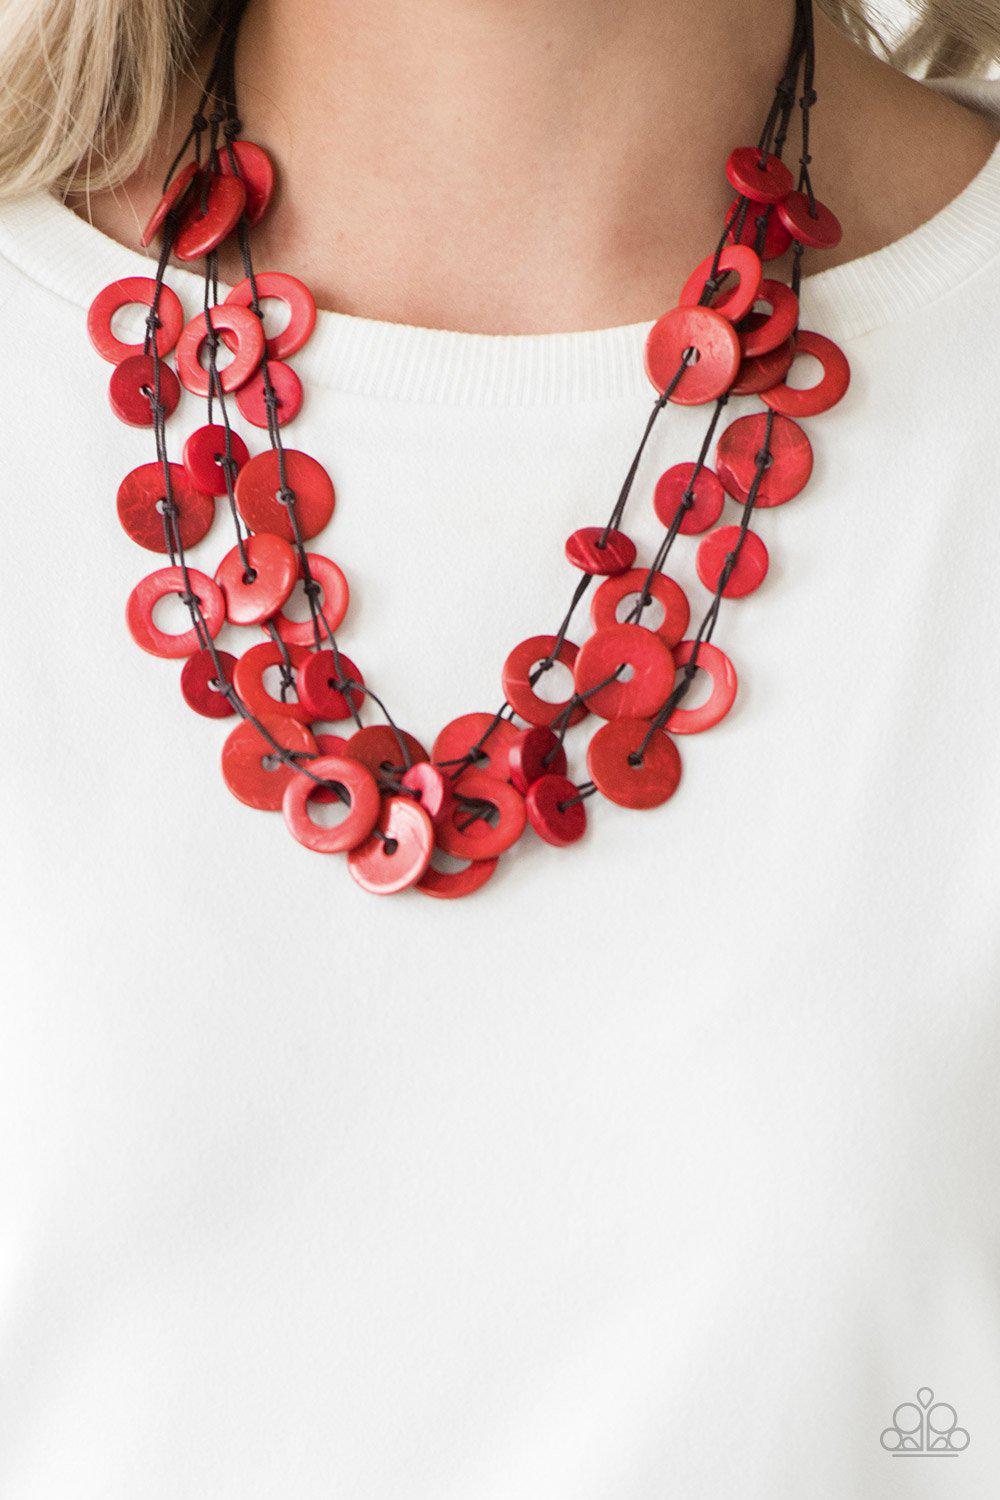 Wonderfully Walla Walla Red Wood Necklace - Paparazzi Accessories-CarasShop.com - $5 Jewelry by Cara Jewels